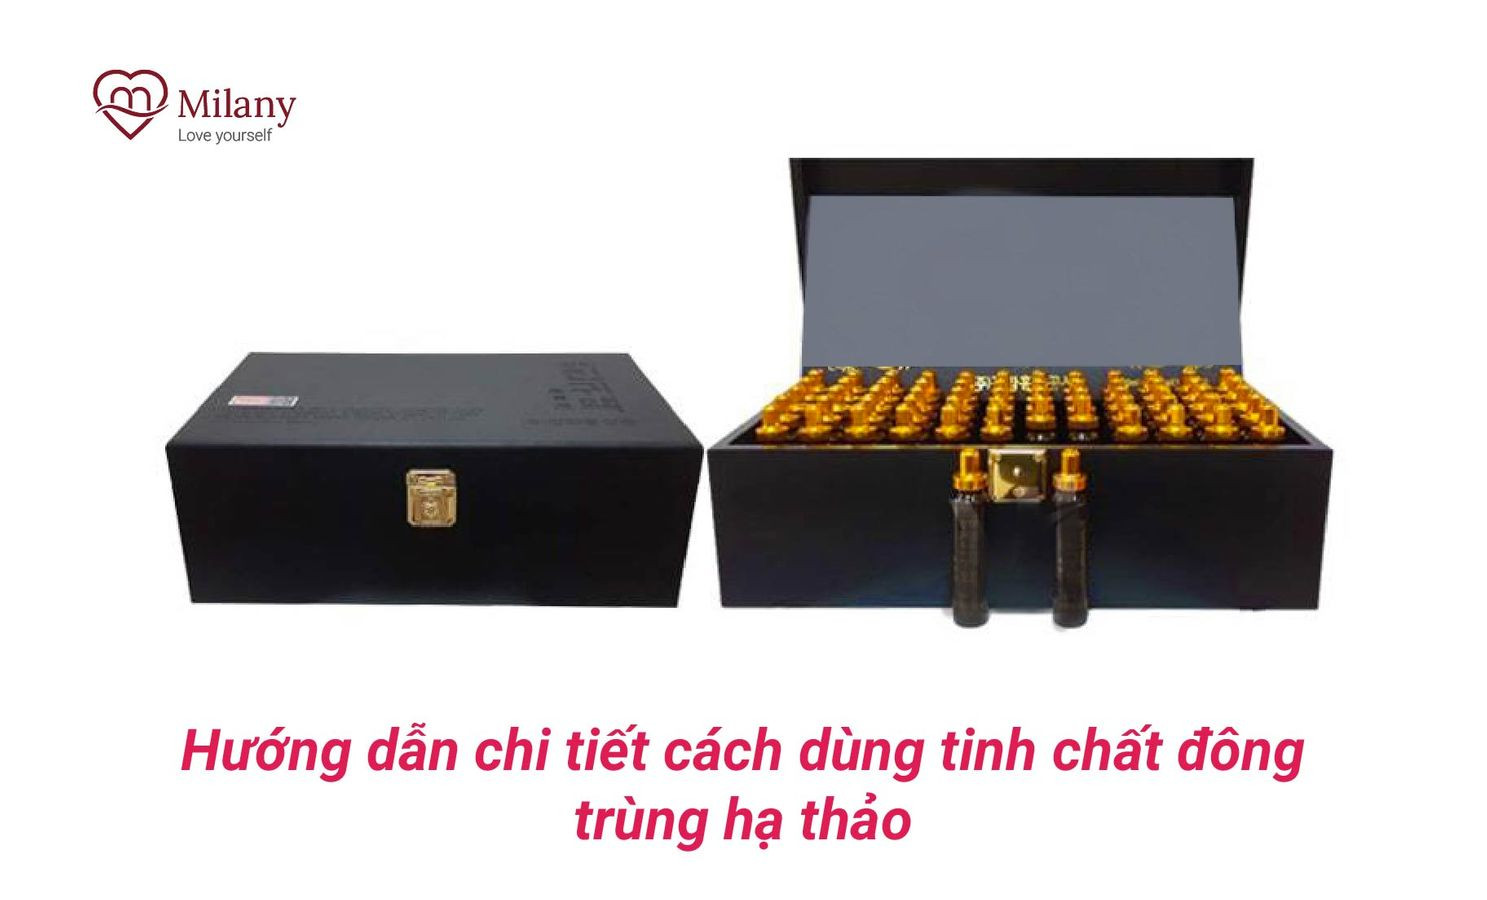 cach-dung-tinh-chat-dong-trung-ha-thao